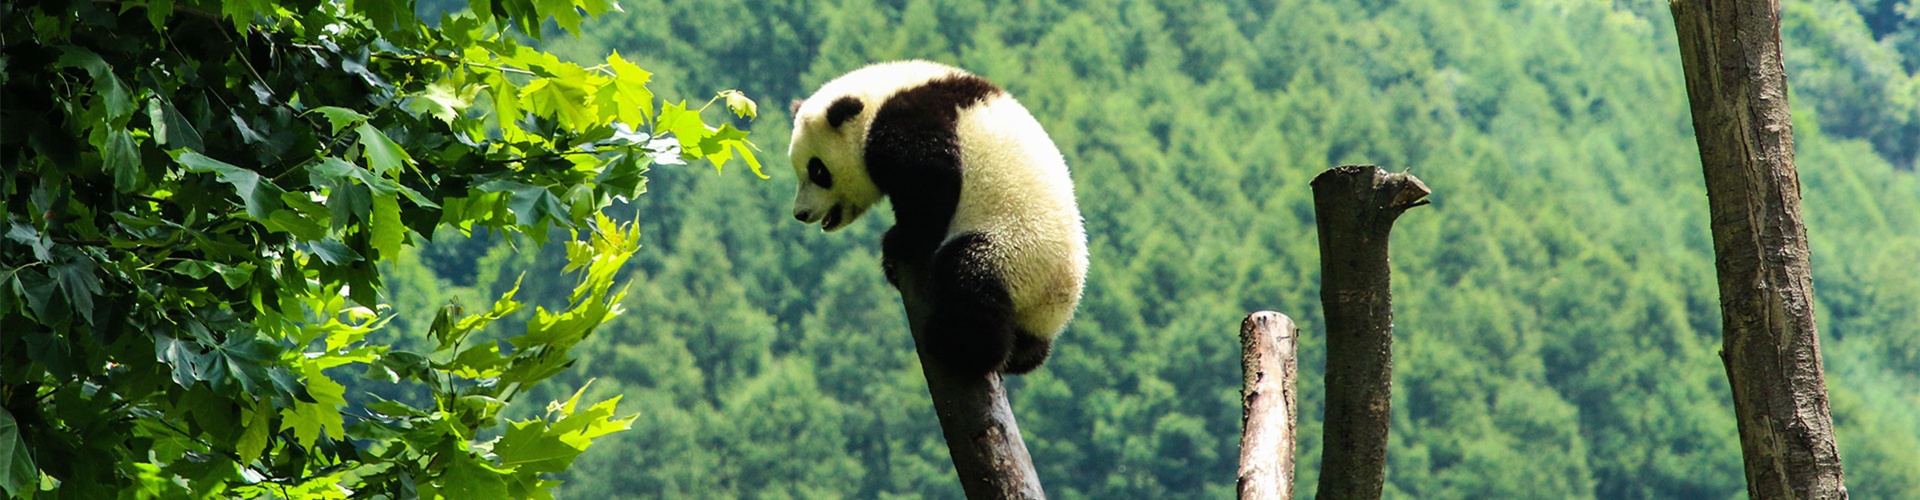 The 5 Best Places to See Giant Pandas in Chengdu